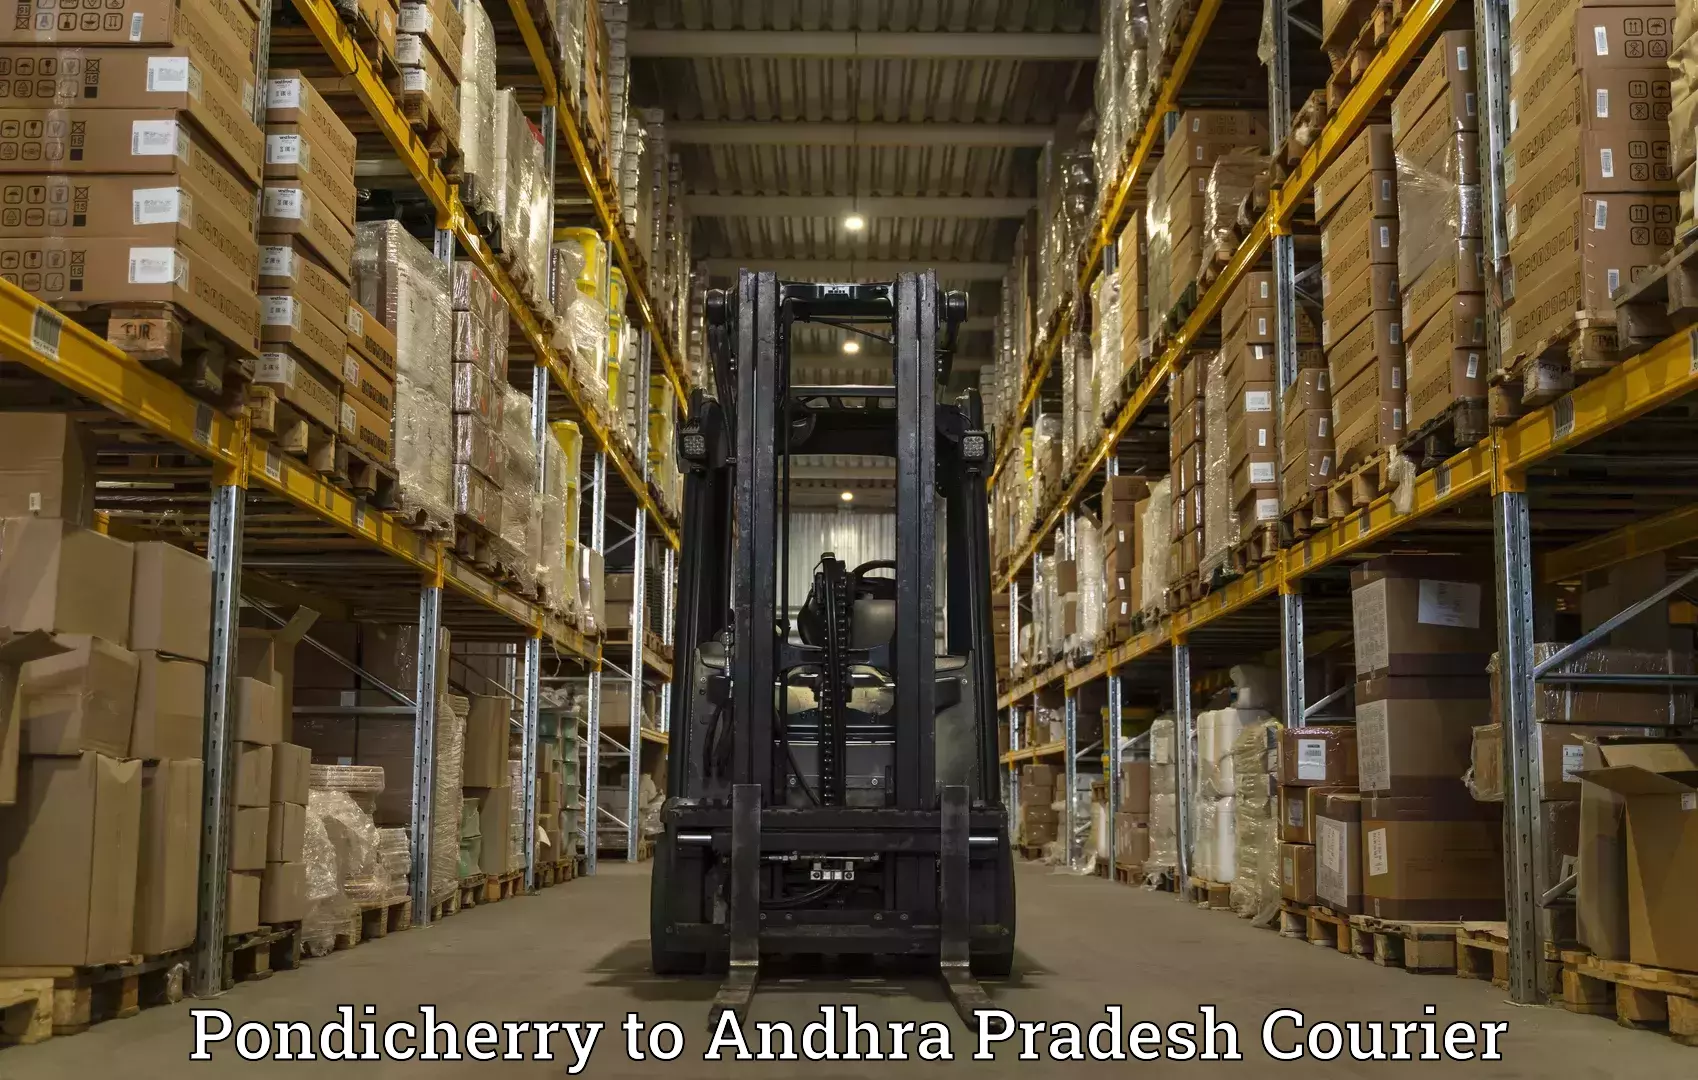 Global shipping solutions Pondicherry to Dachepalle